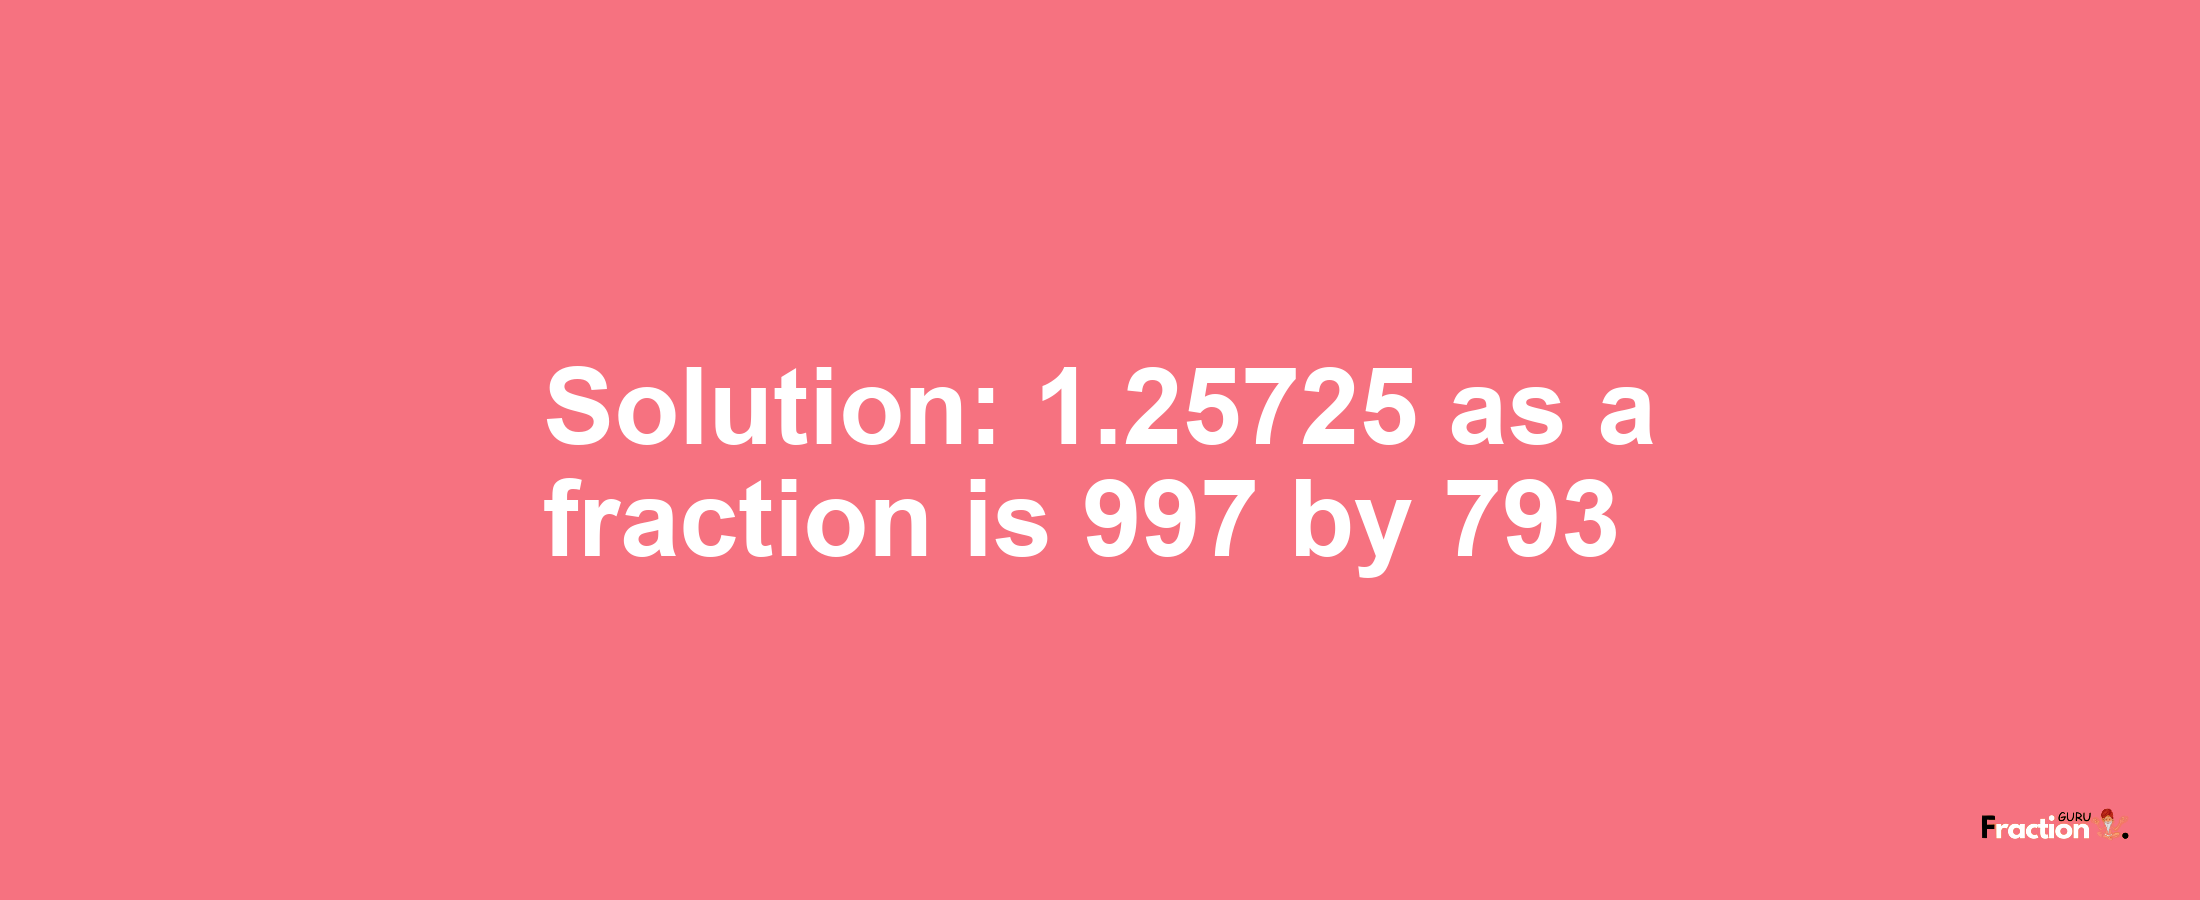 Solution:1.25725 as a fraction is 997/793